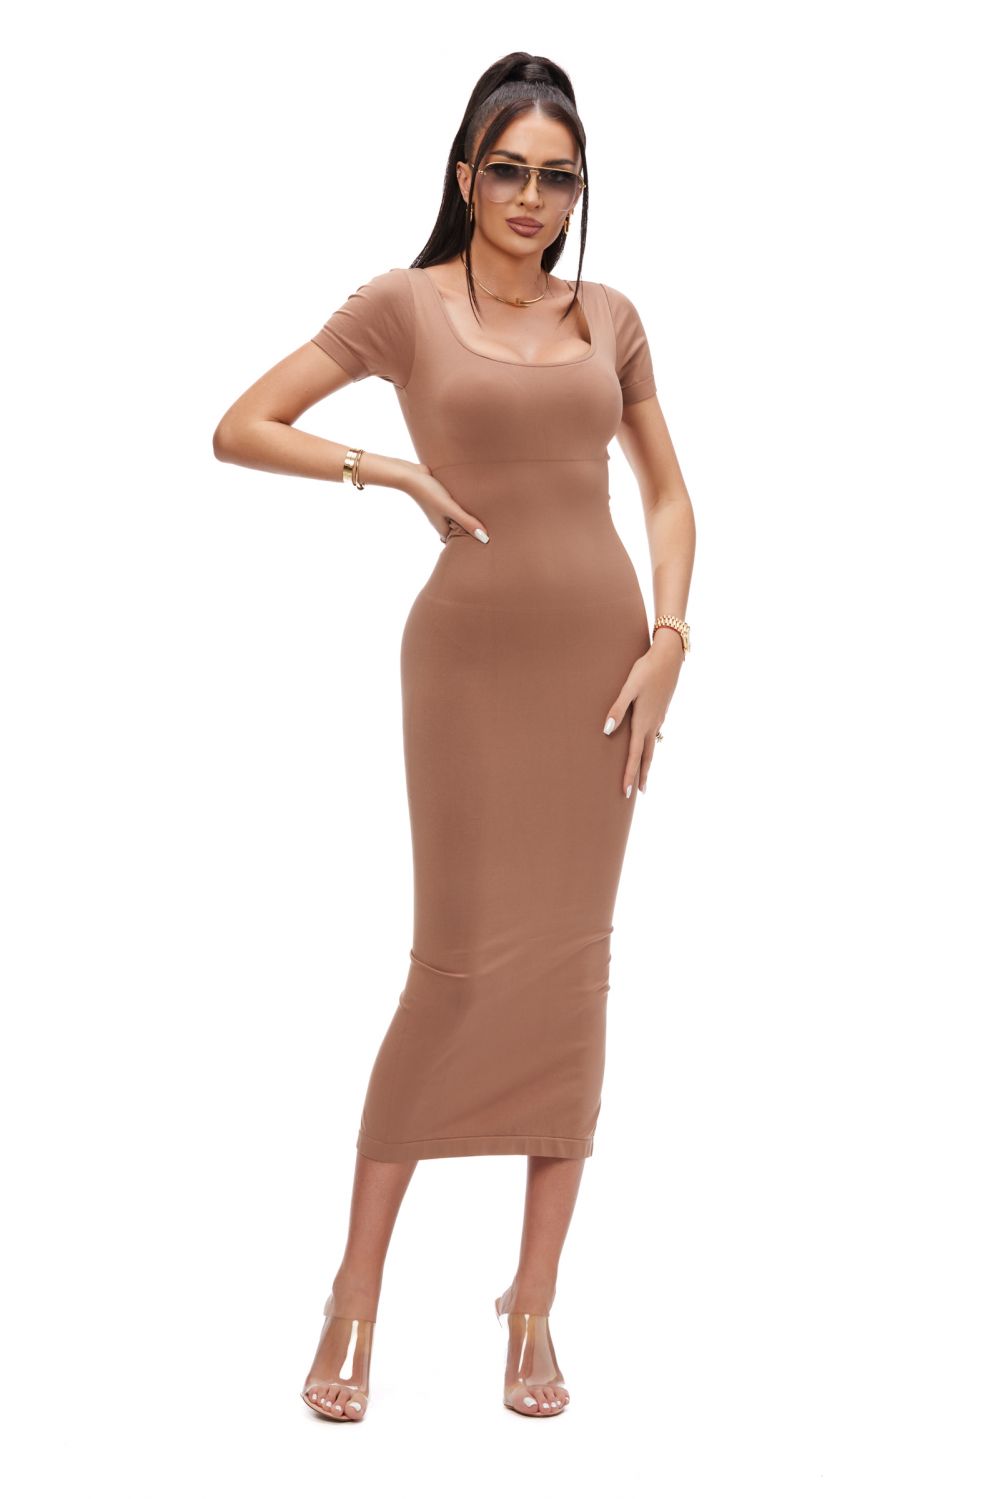 Ladies' casual brown modelling dress Zumyna Bogas